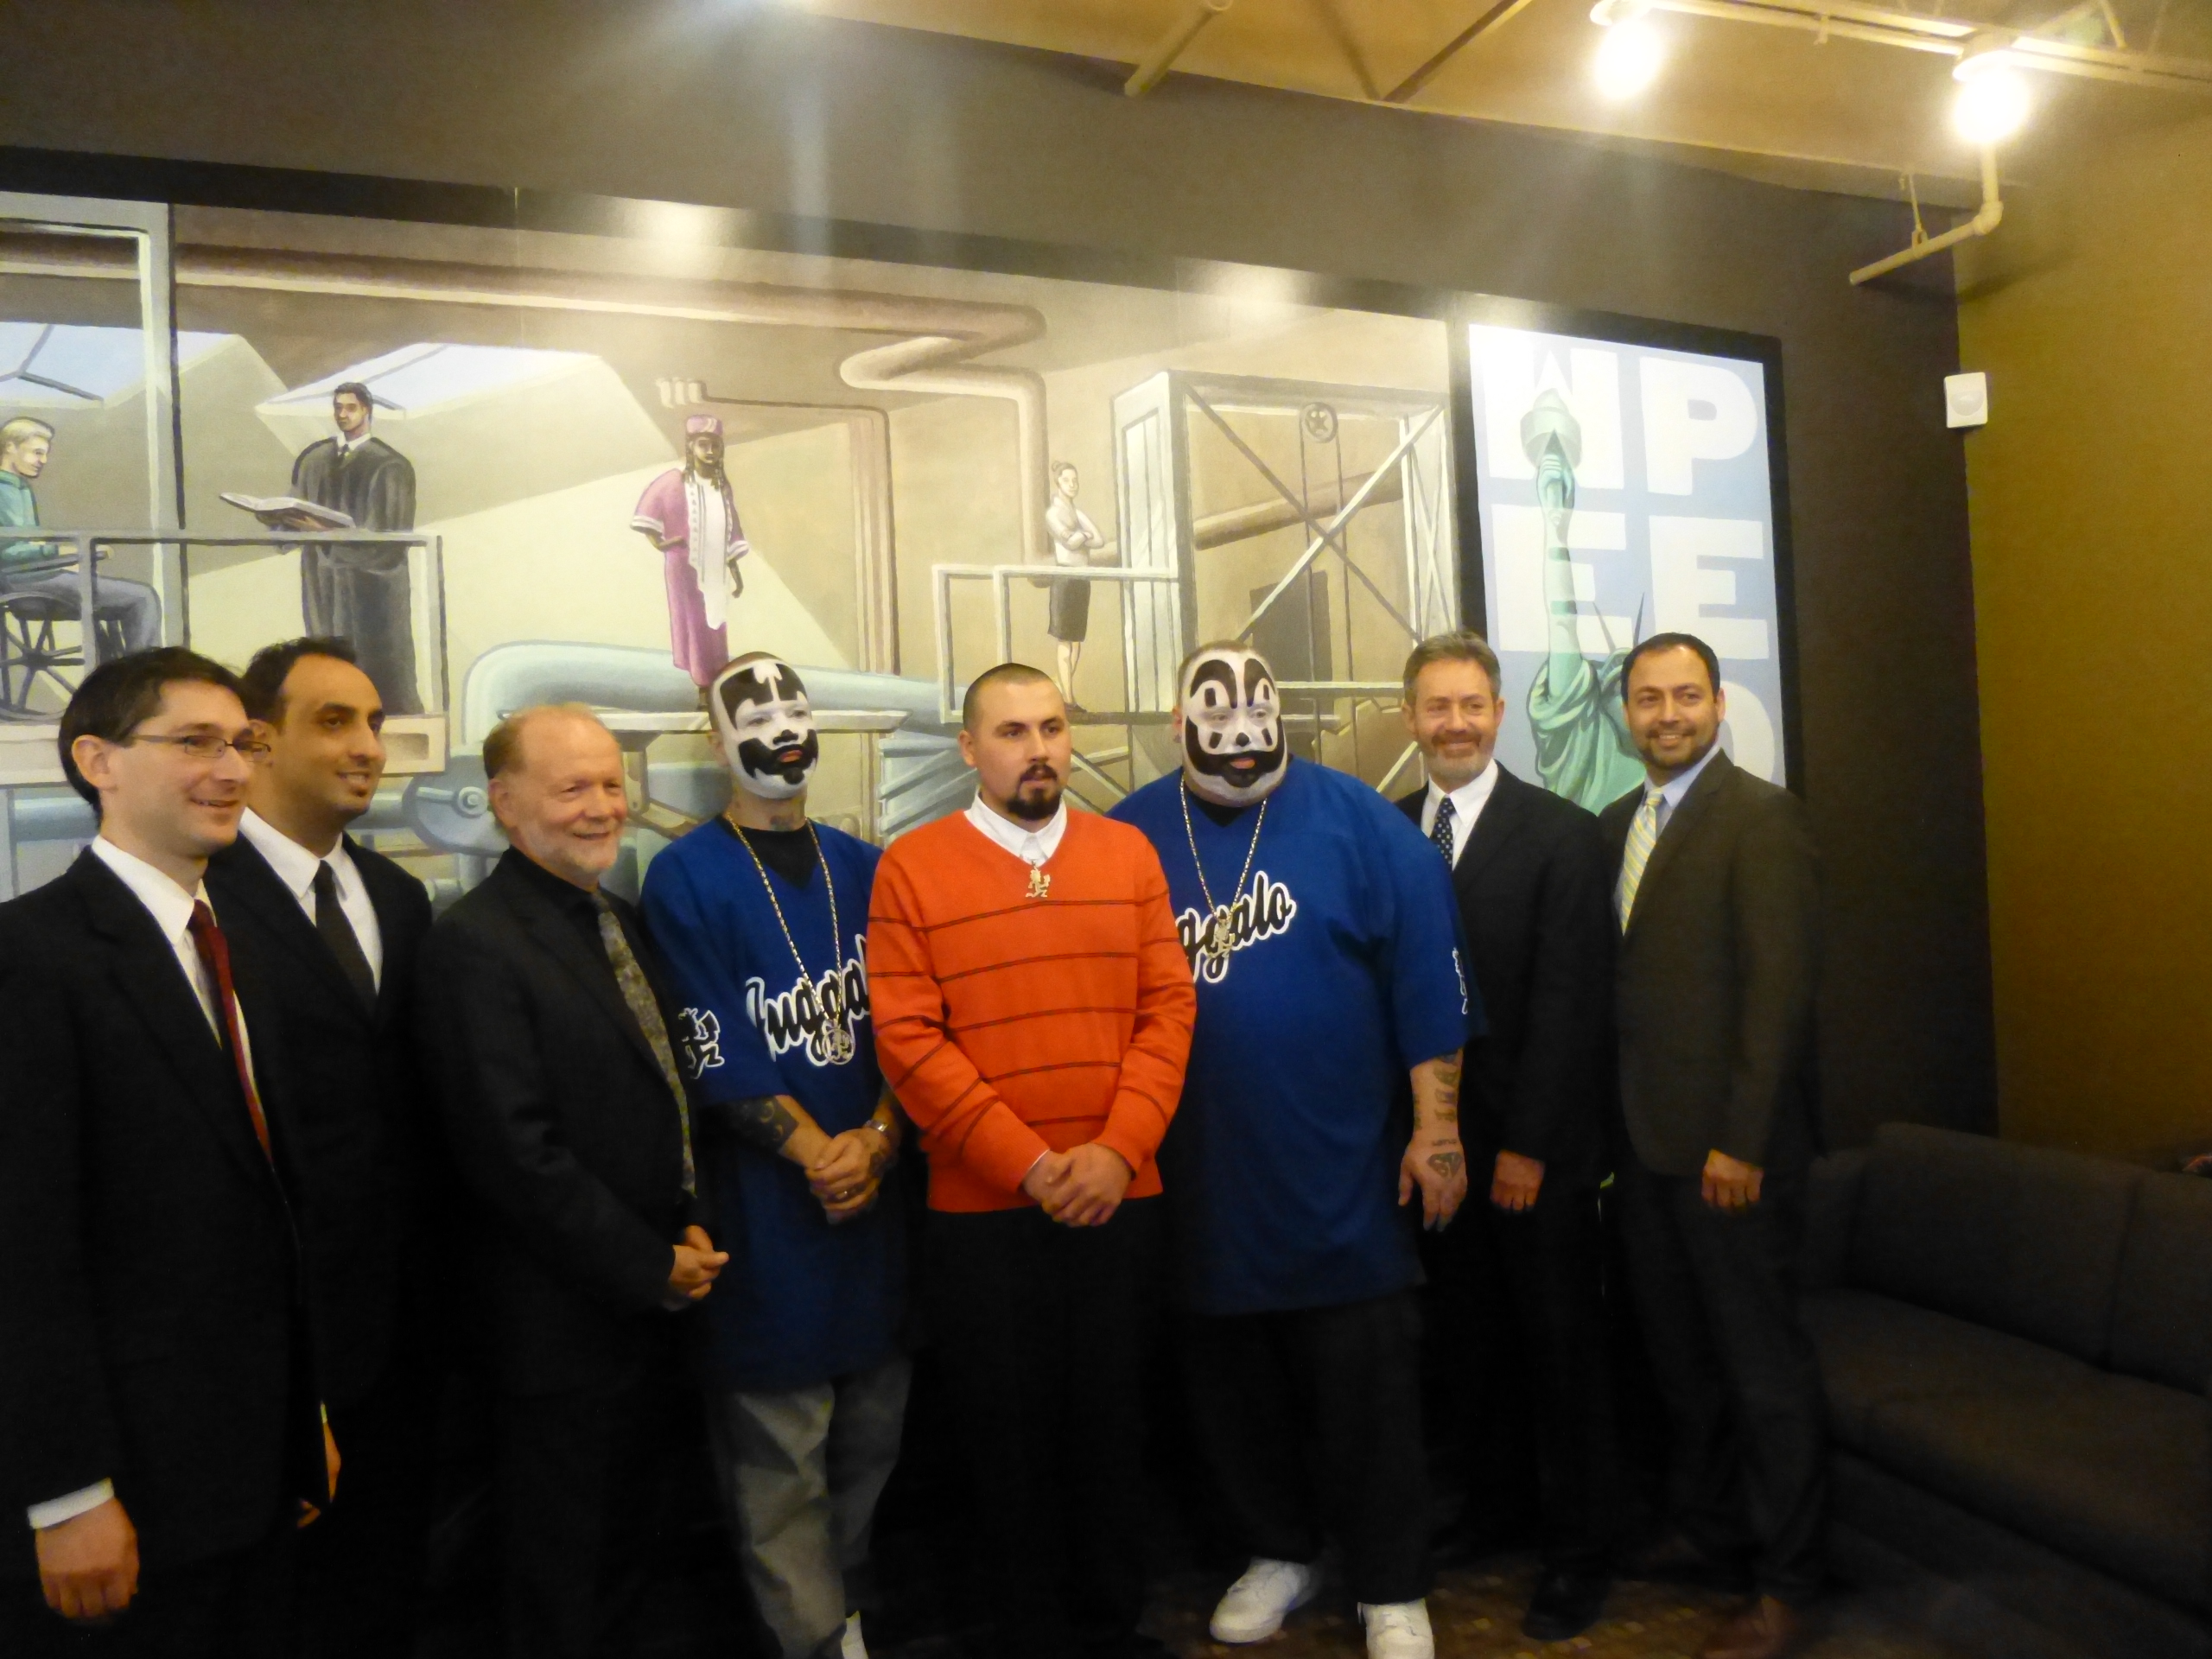 ICP poses for a photo with Brandon Bradley and attorneys. (credit: Pat Sweeting/WWJ)